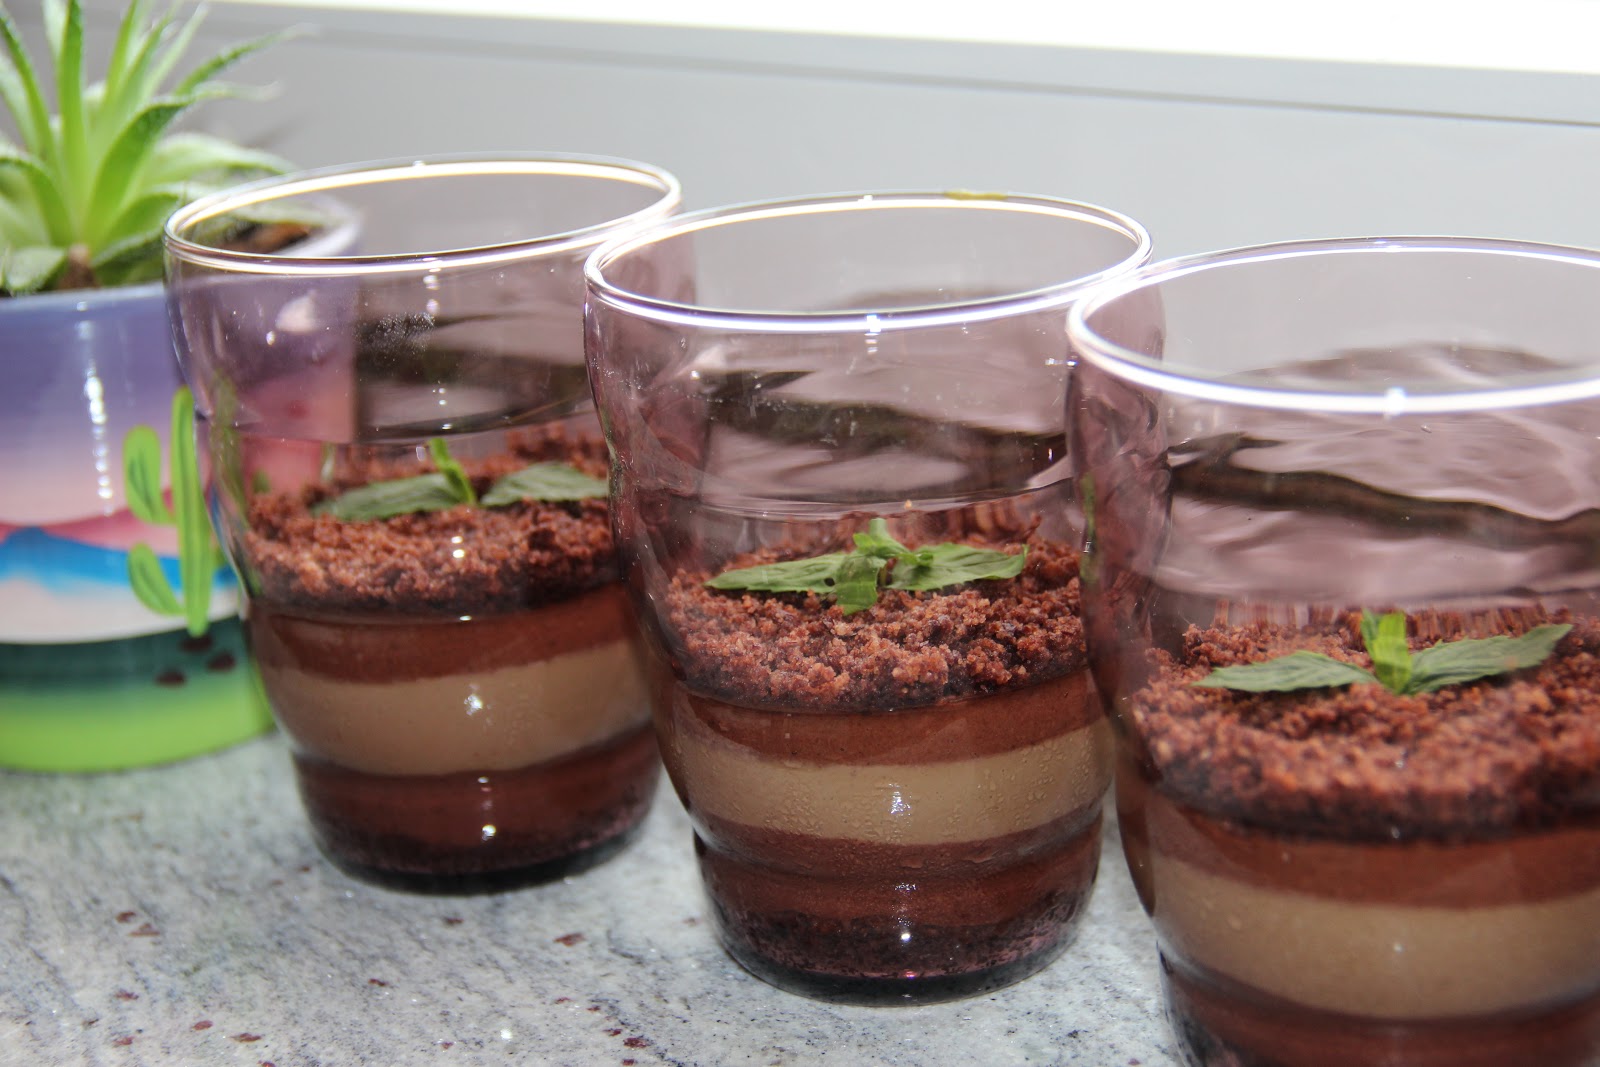 Taste Raw: &amp;quot;AFTER EIGHT&amp;quot; PUDING / &amp;quot;AFTER EIGHT&amp;quot; PUDDING